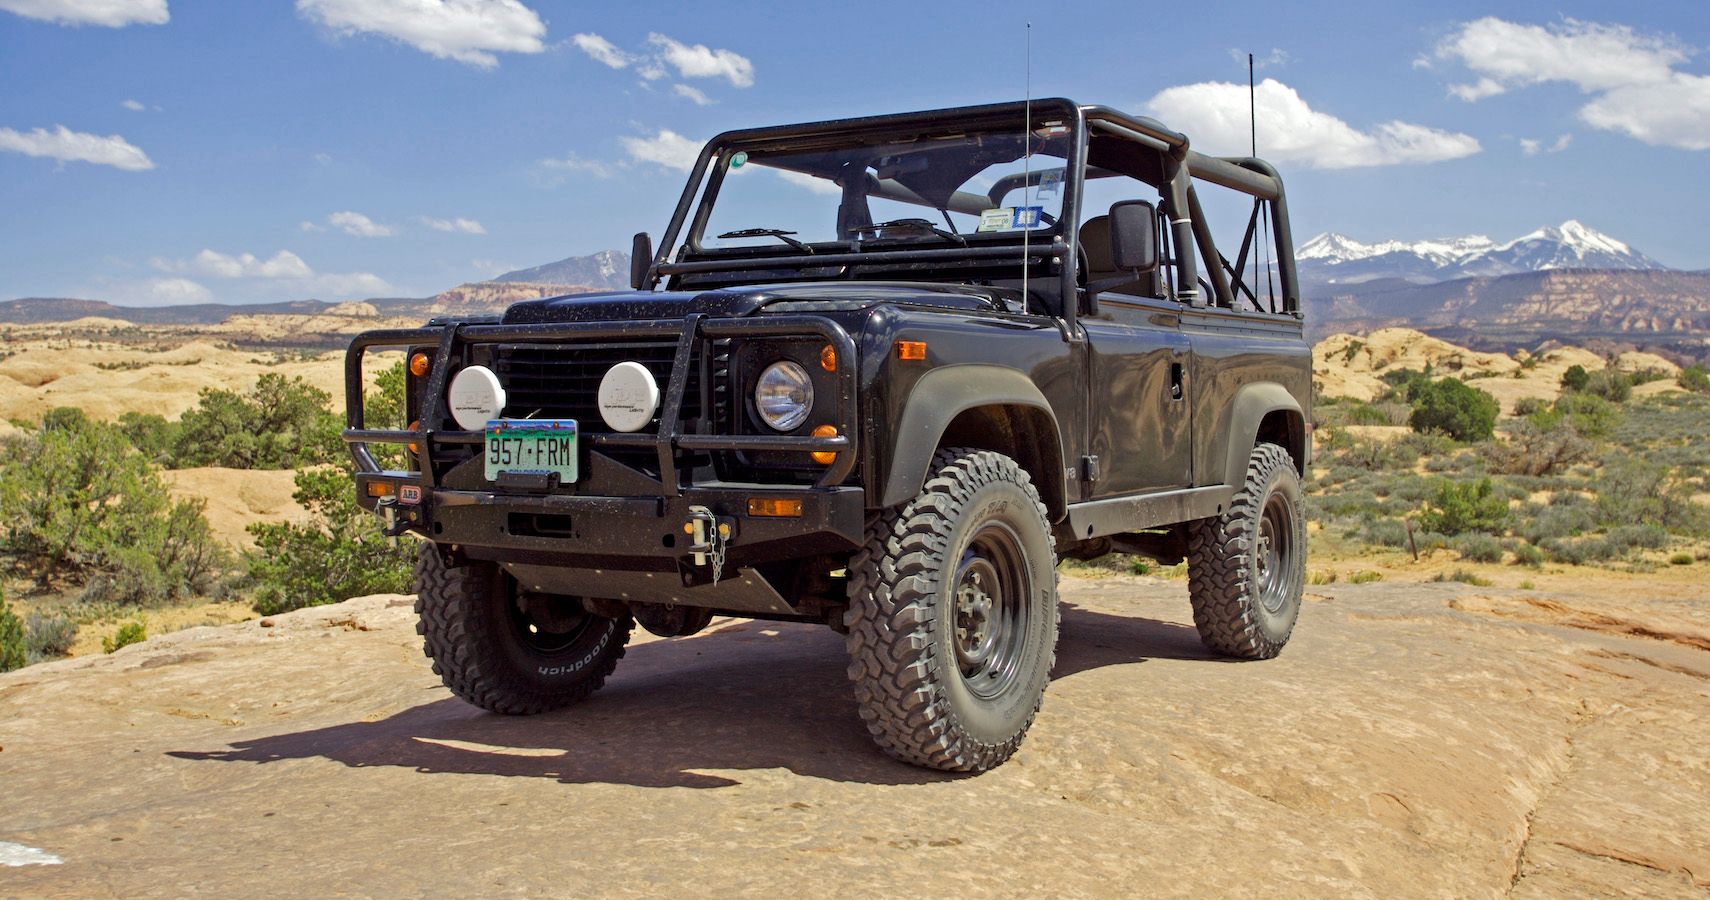 The Reason Old Land Rover Defenders Are Exotics In North America